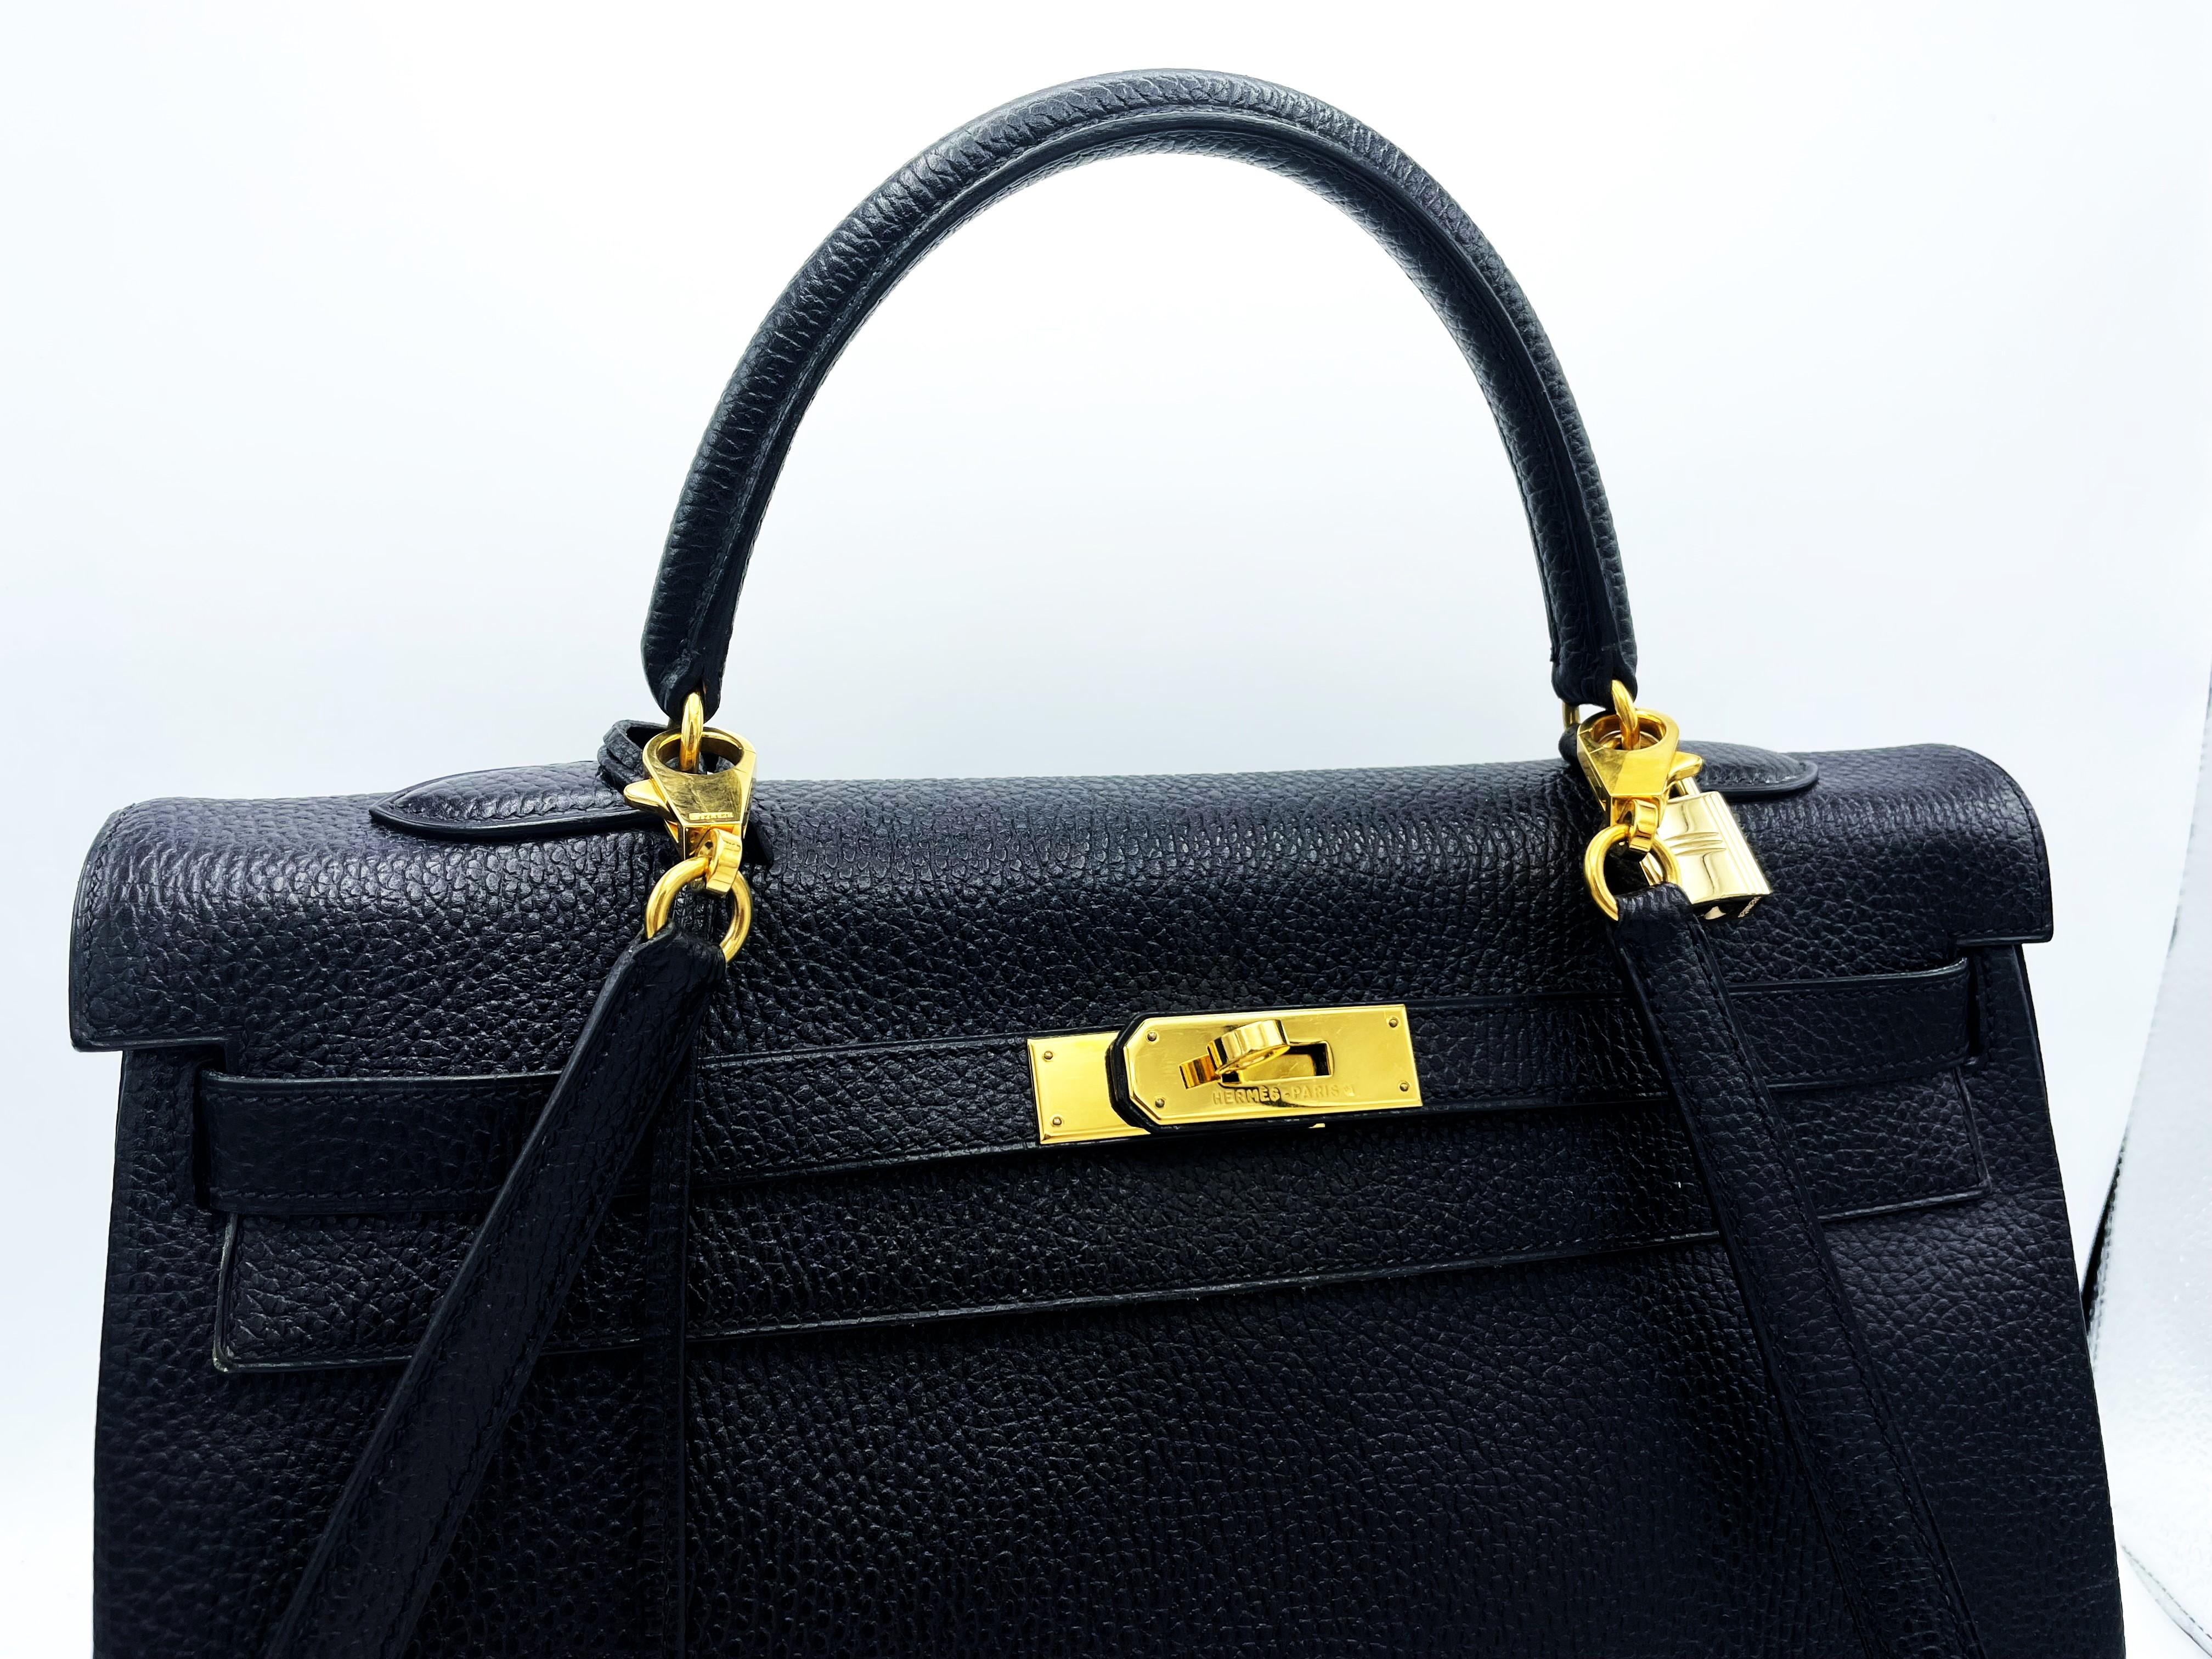 HERMES KELLY BAG 2 WAY 35 cm, CHEVRE LEATHER IN BLACK, KOLLECTION 1998 - B  For Sale 1